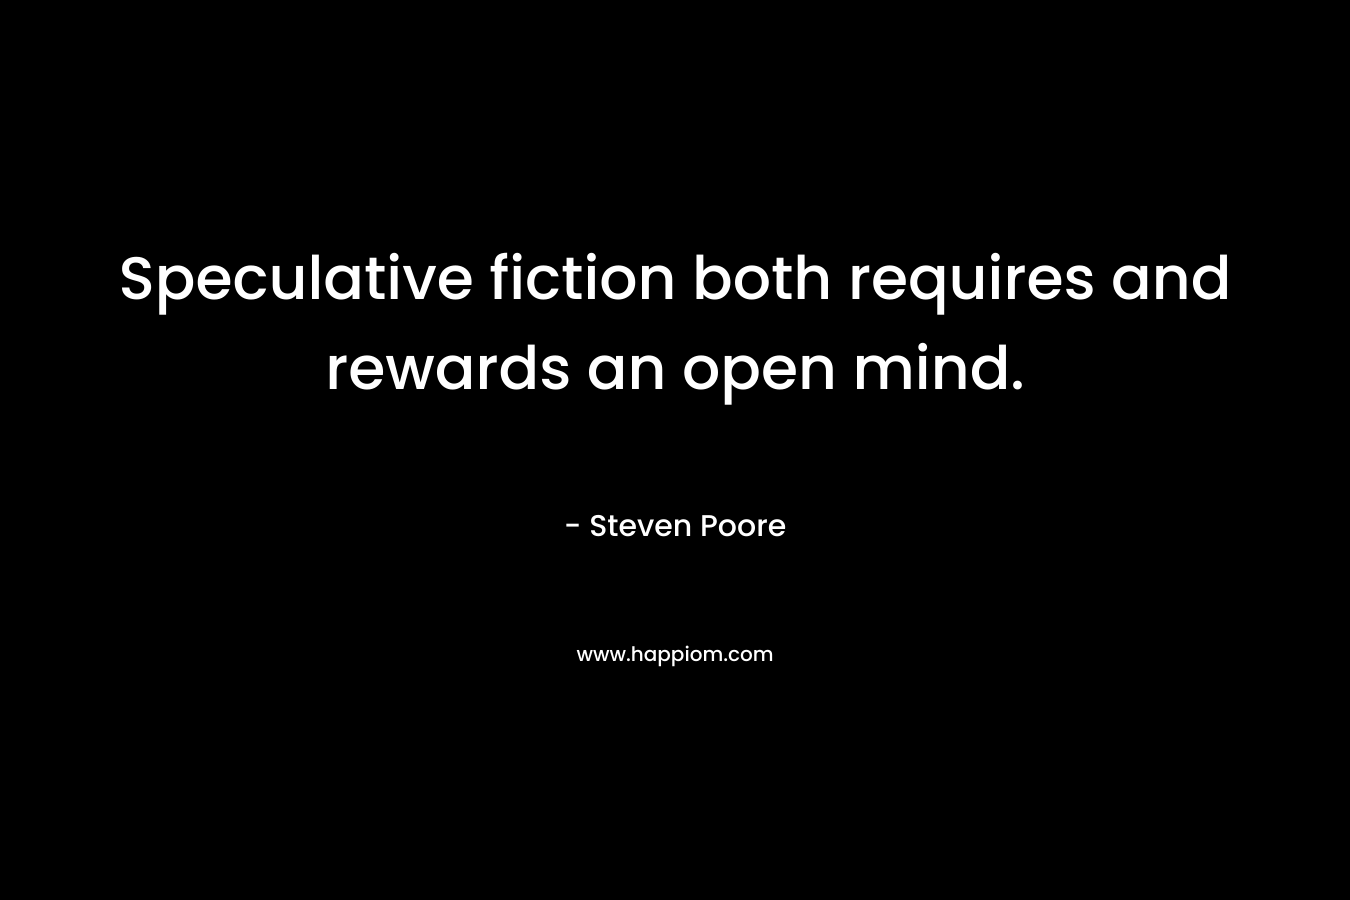 Speculative fiction both requires and rewards an open mind.